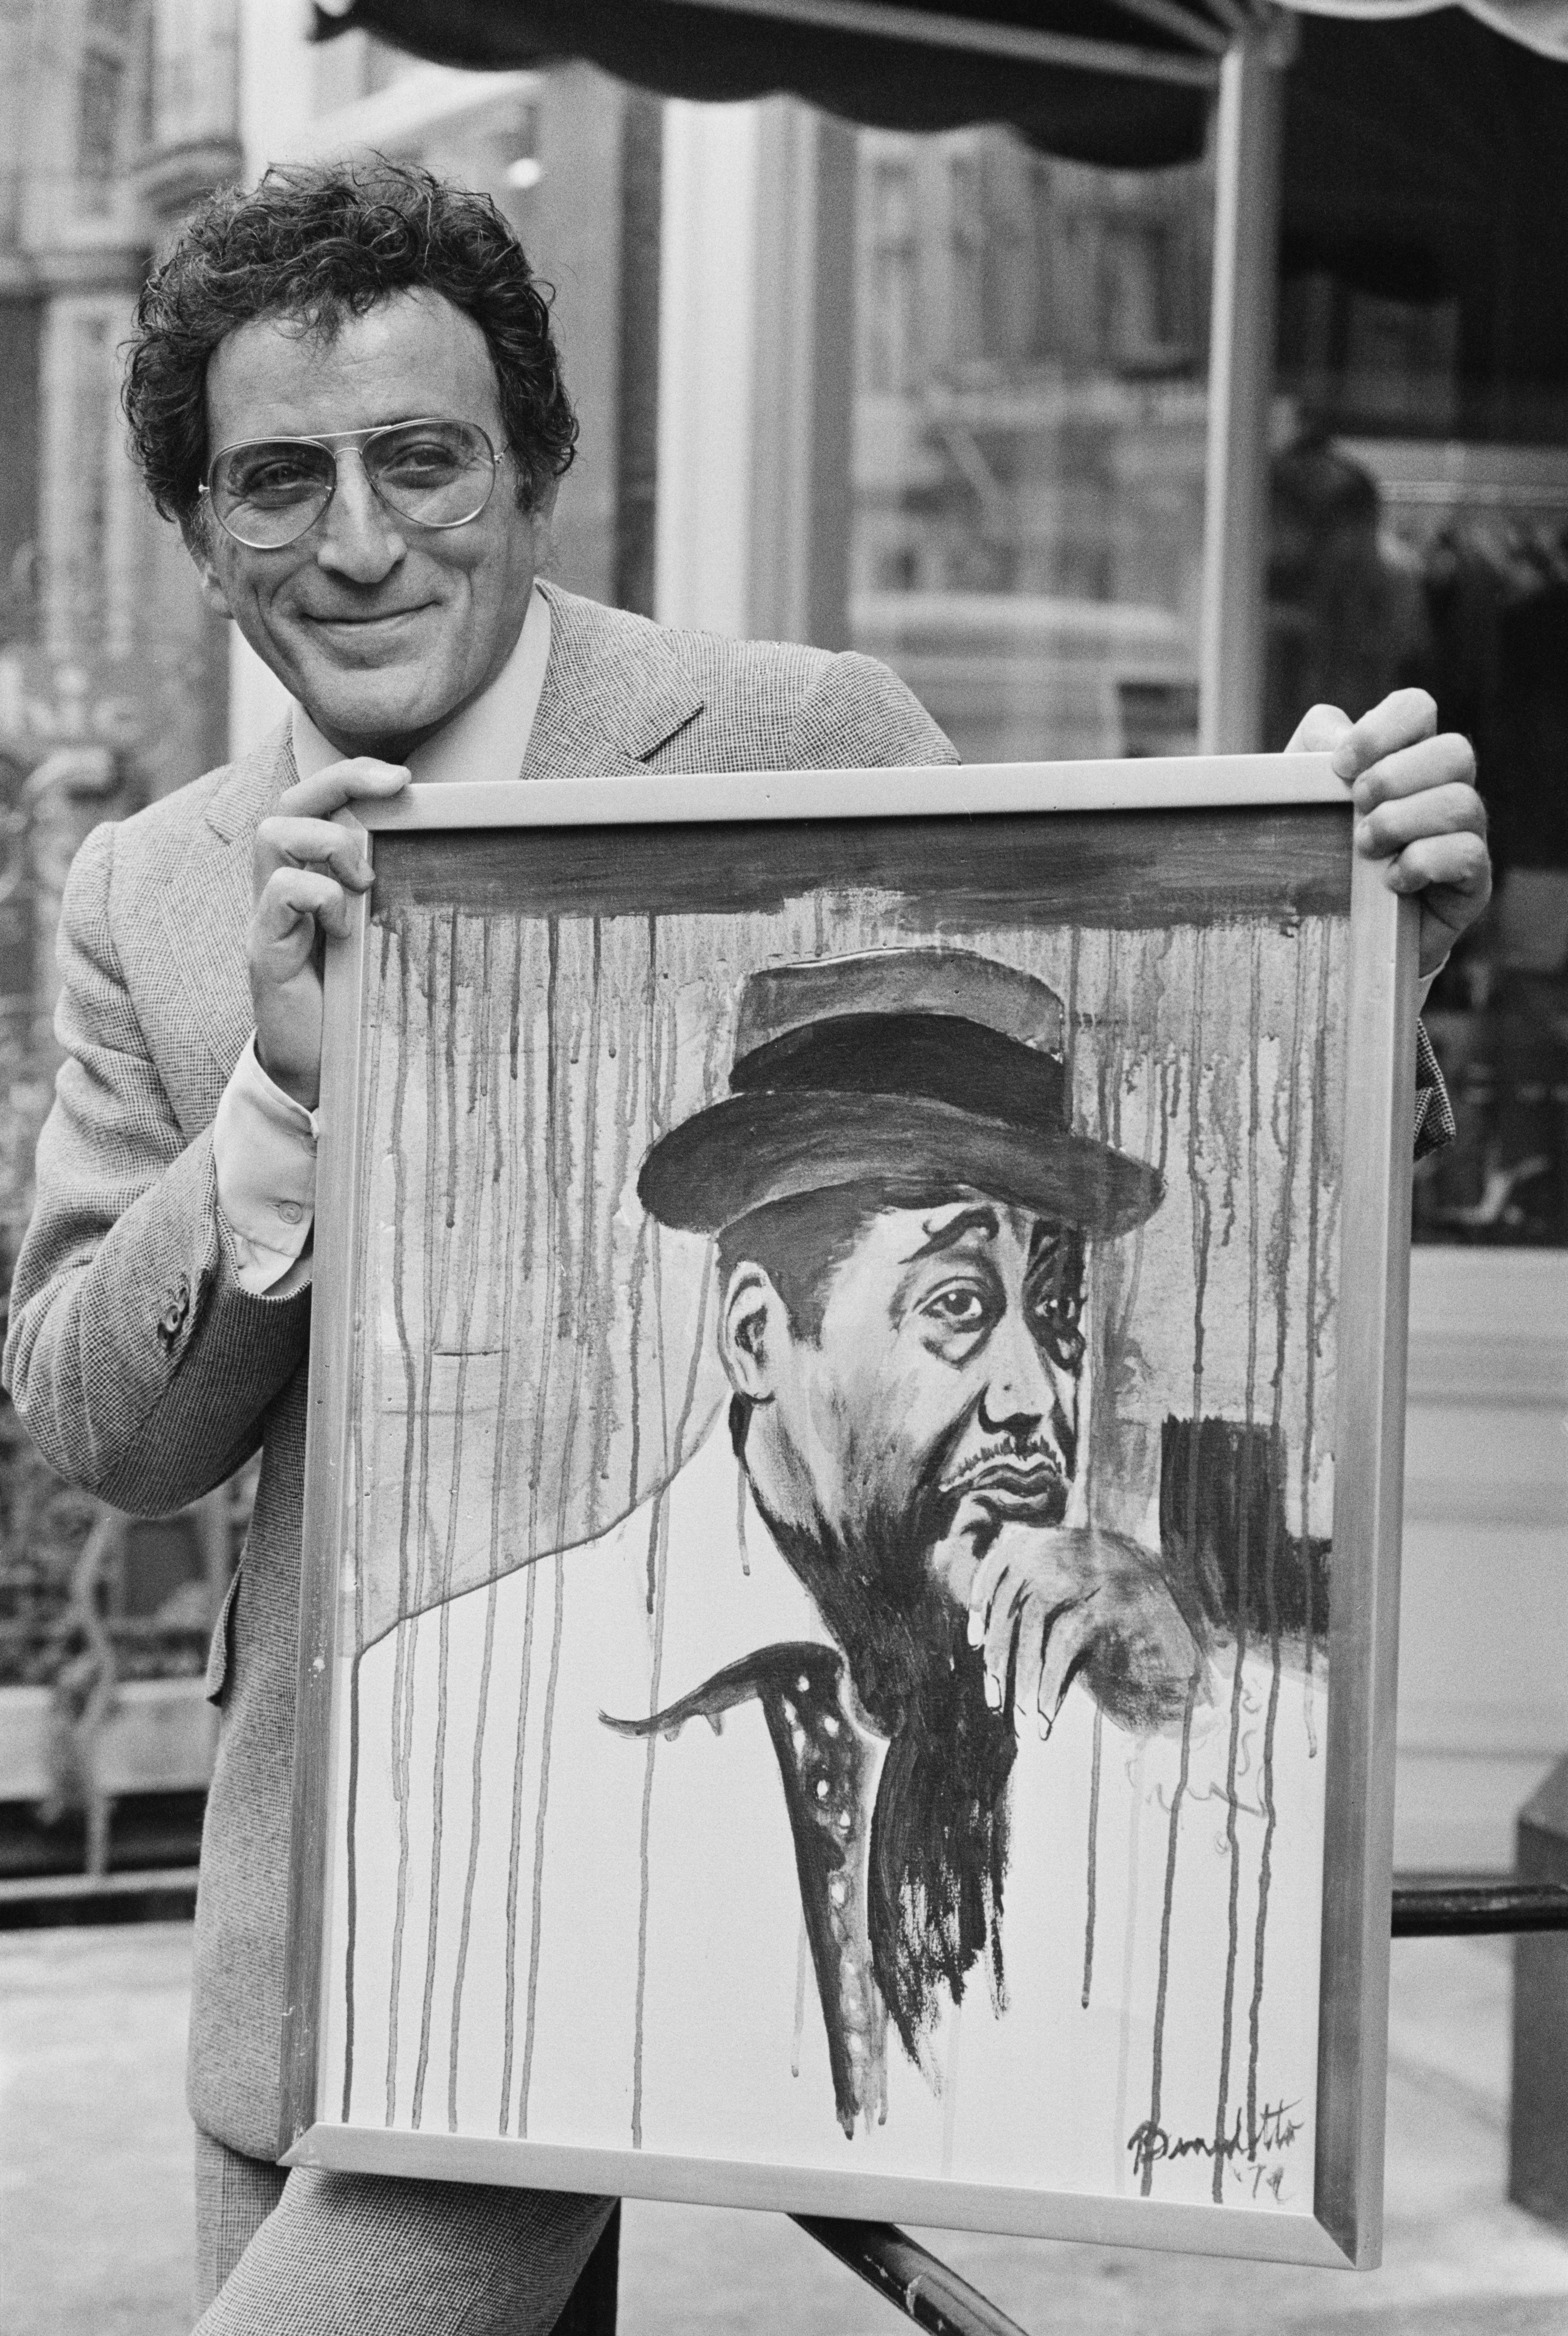 Holding one of his paintings, which he created under the name Anthony Benedetto, in 1977